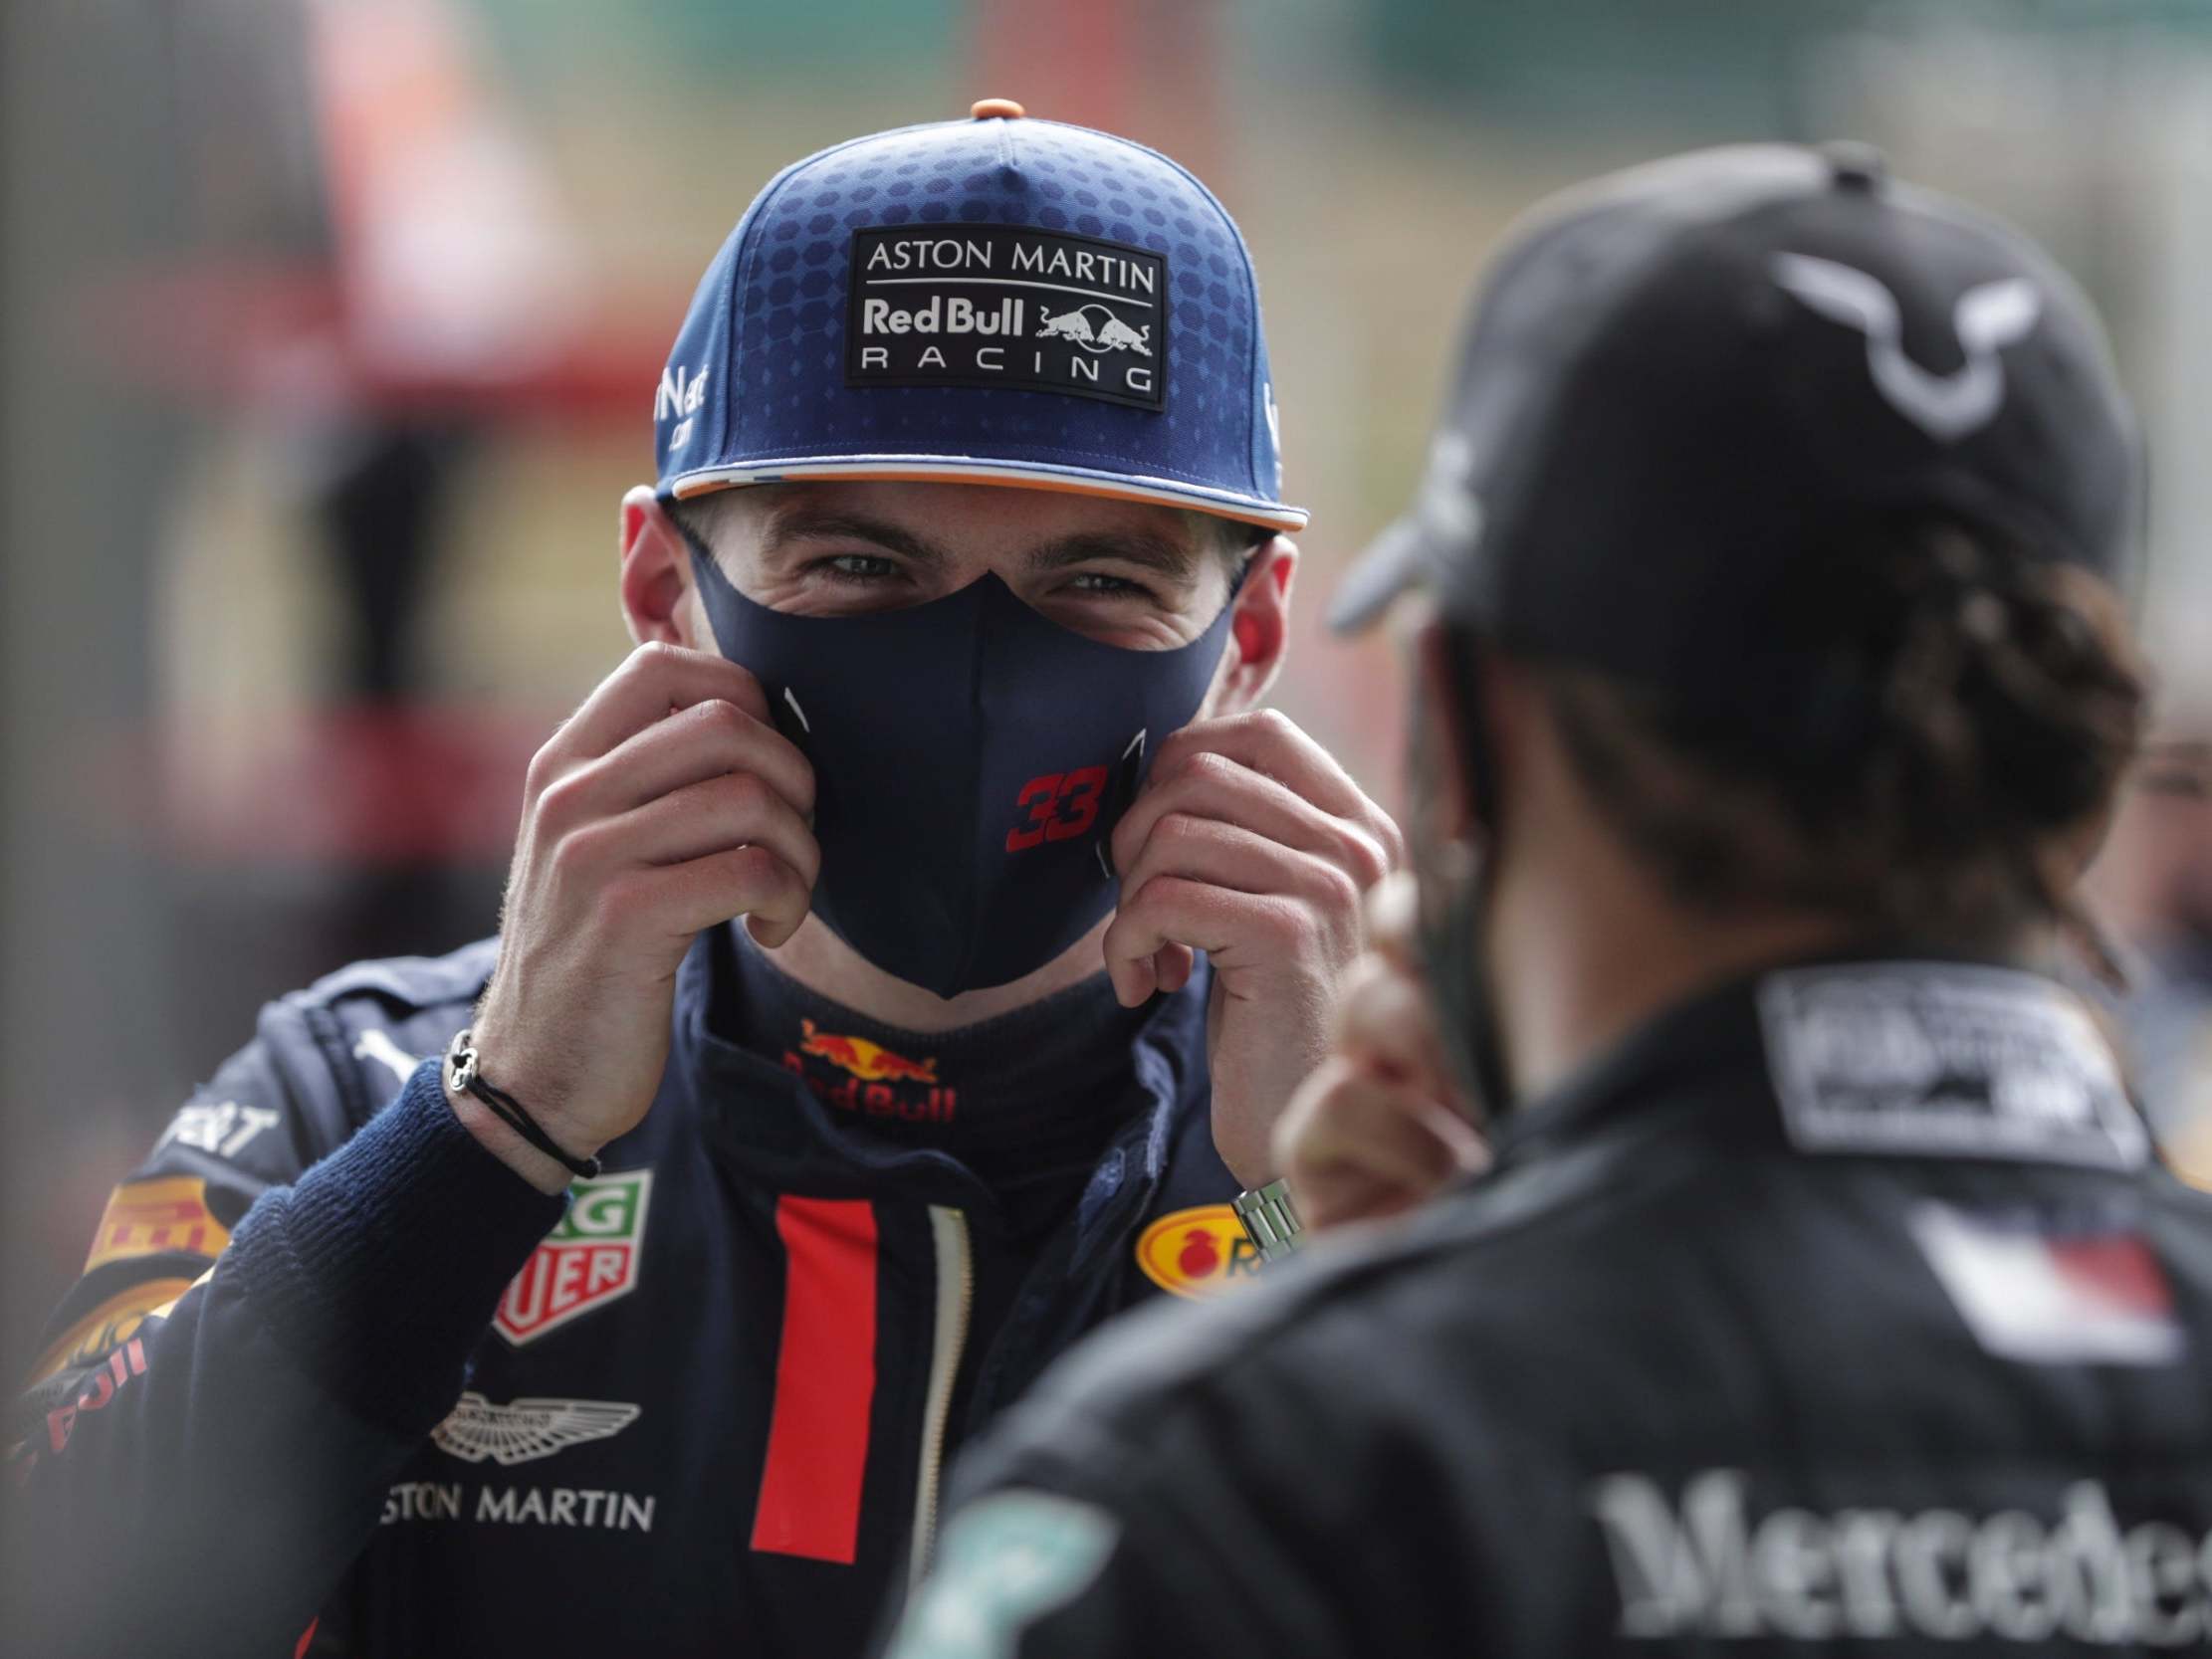 Max Verstappen is tipped to challenge Lewis Hamilton for this year’s title